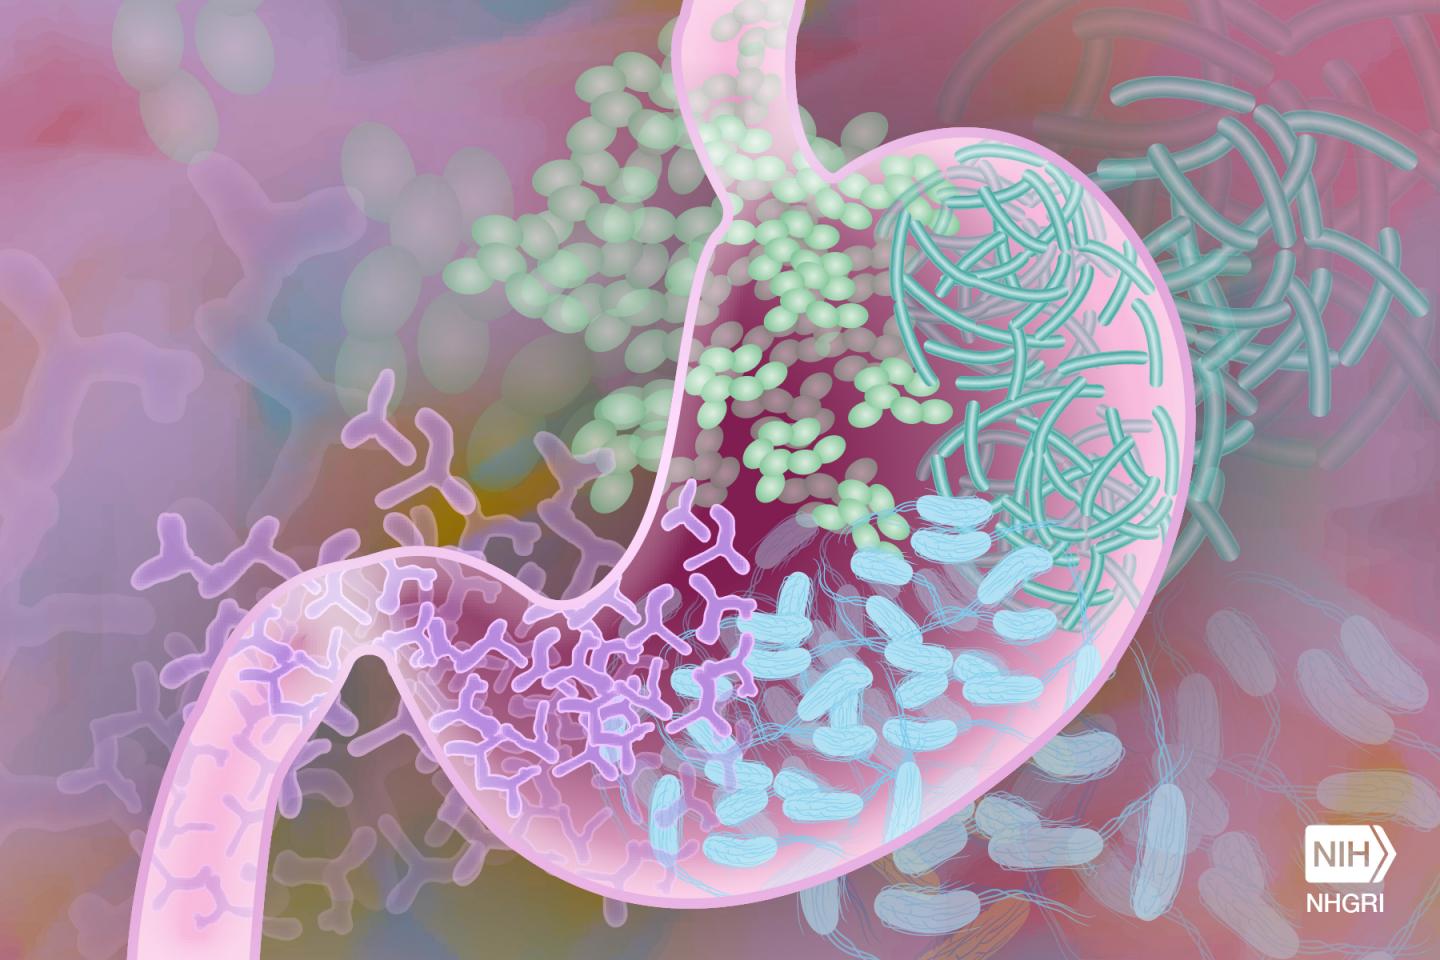 Illustration of the Gut Microbiome